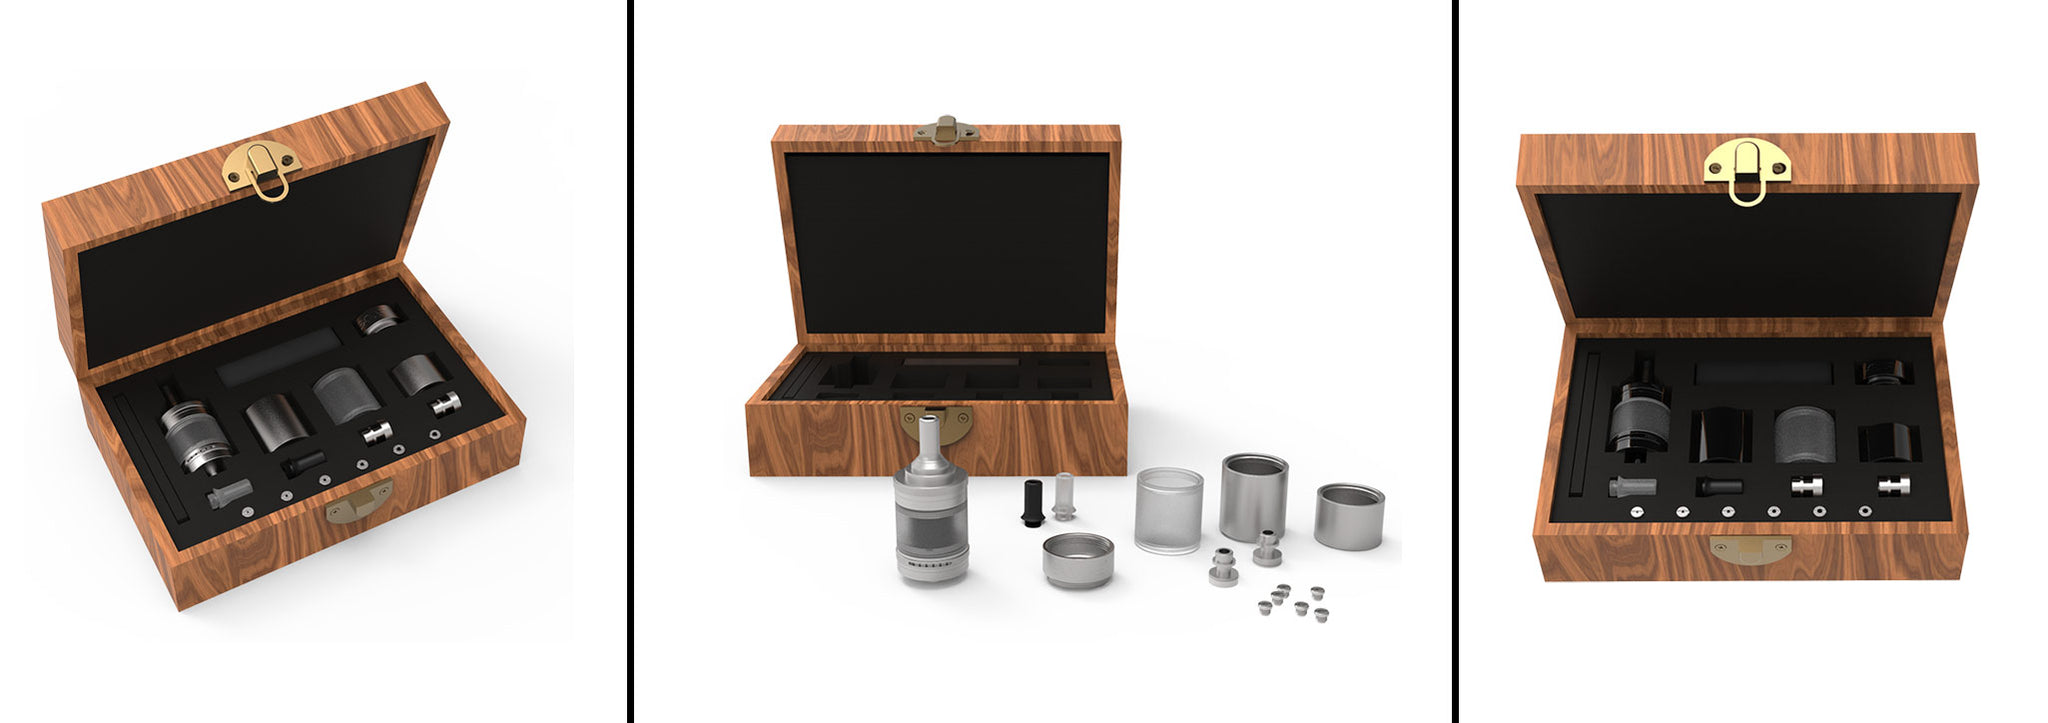 Exvape V1.4 Expromizer Wooden Packaging Box